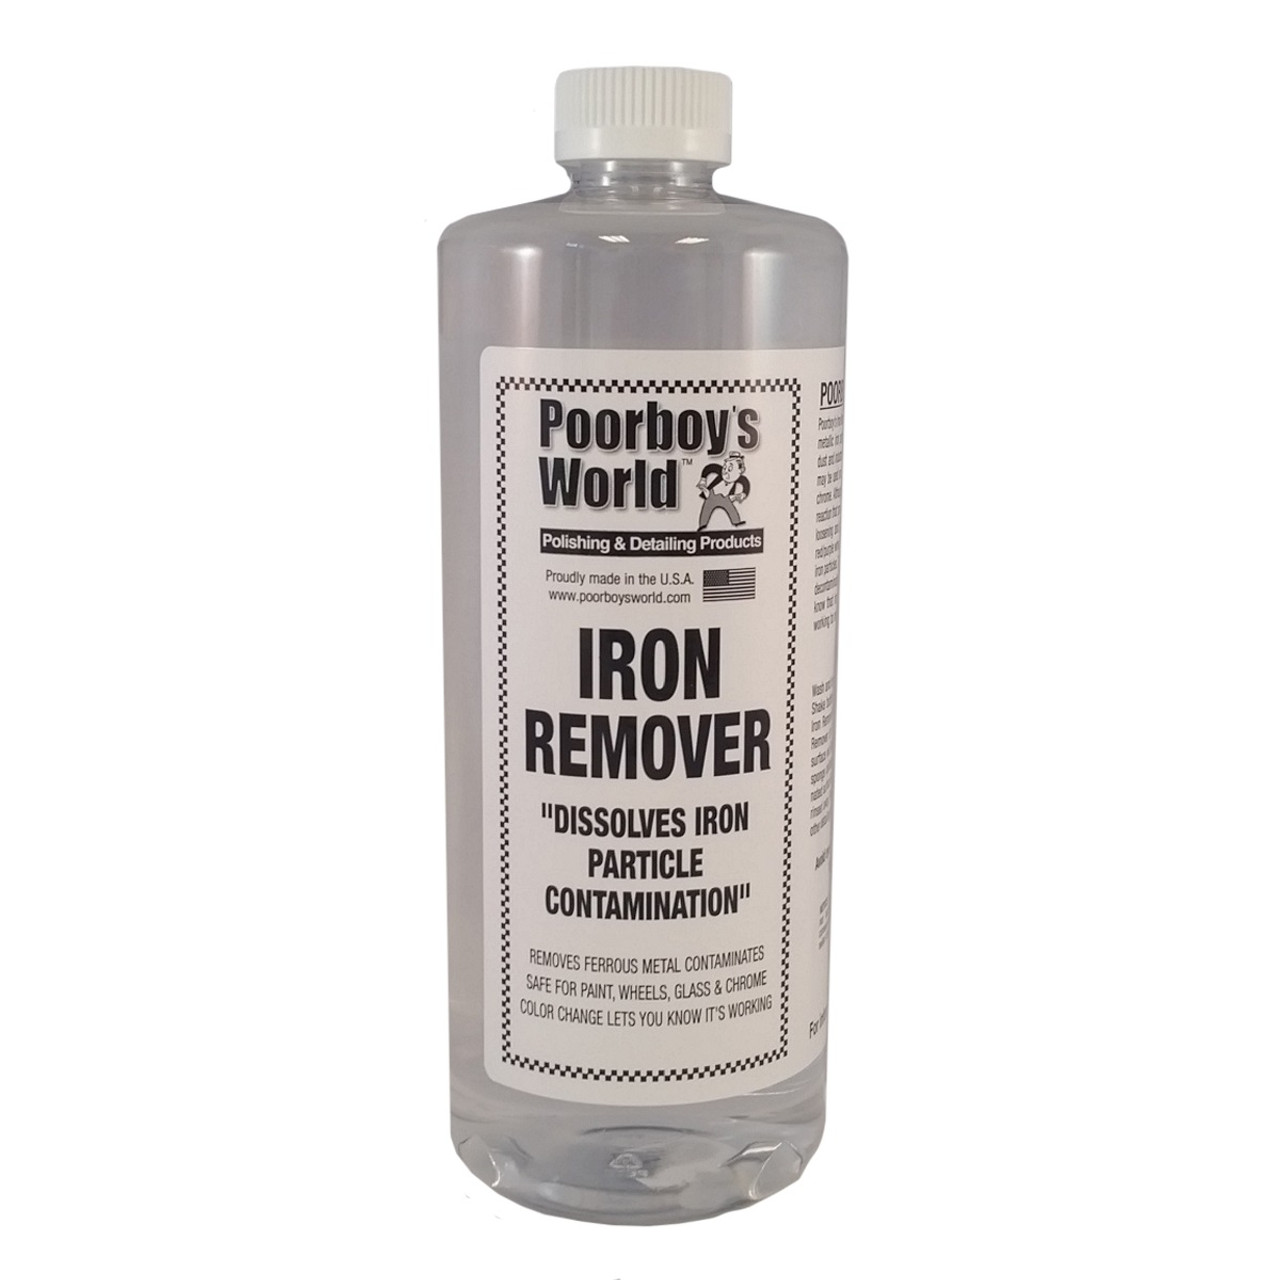 Poorboy's World Iron Remover 32oz Refill